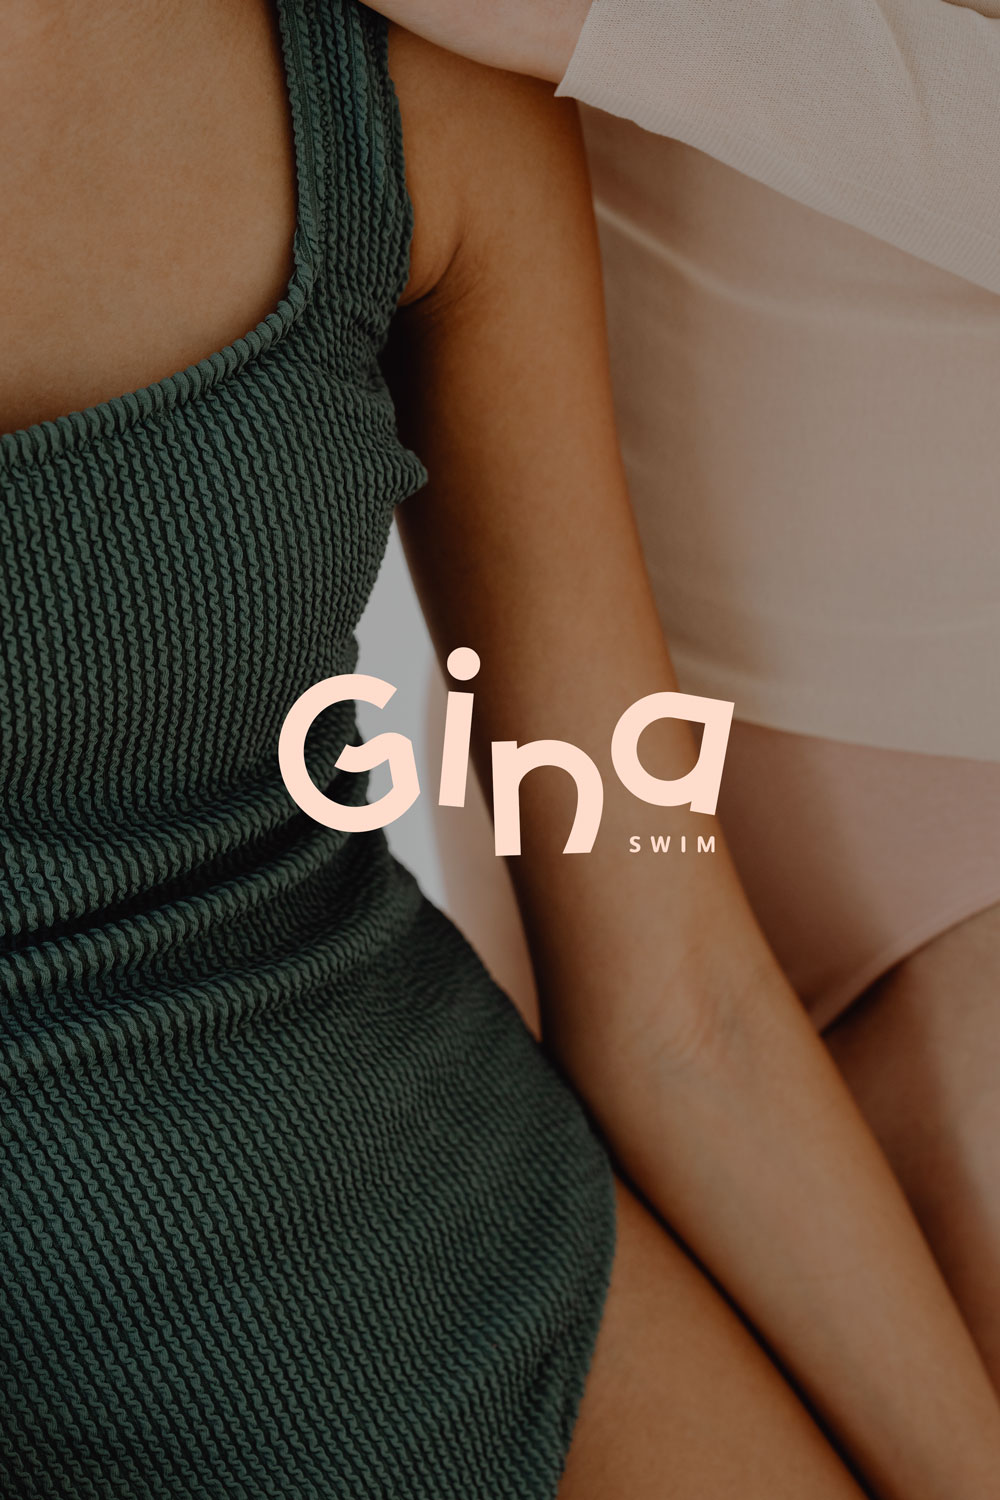 Gina Swim Brand Imagery by Everything Here Now